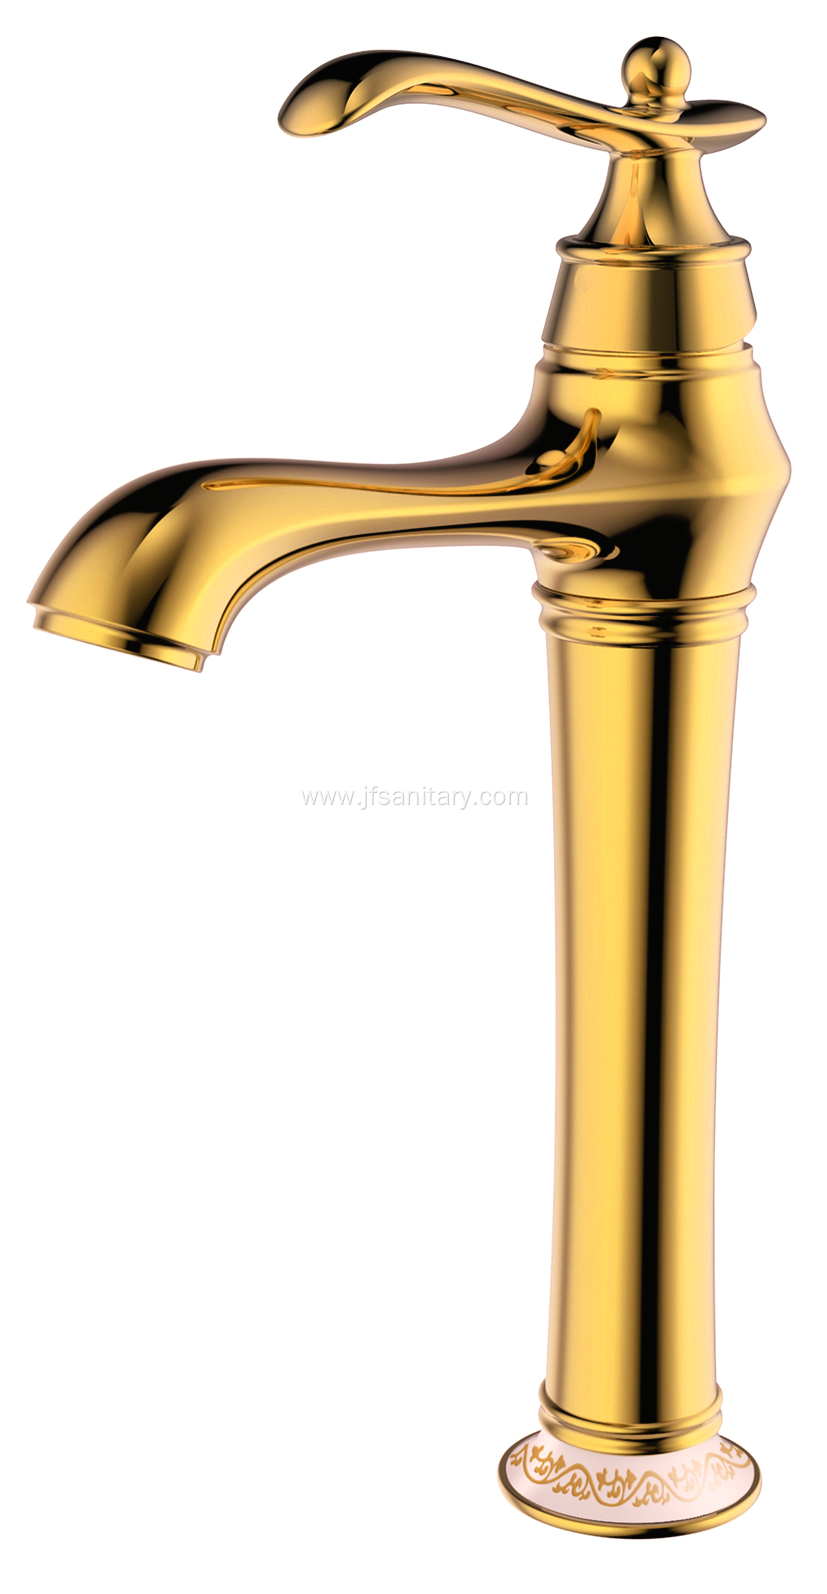 Gold Brass Single Lever Lavatory Vessel Faucet Tall